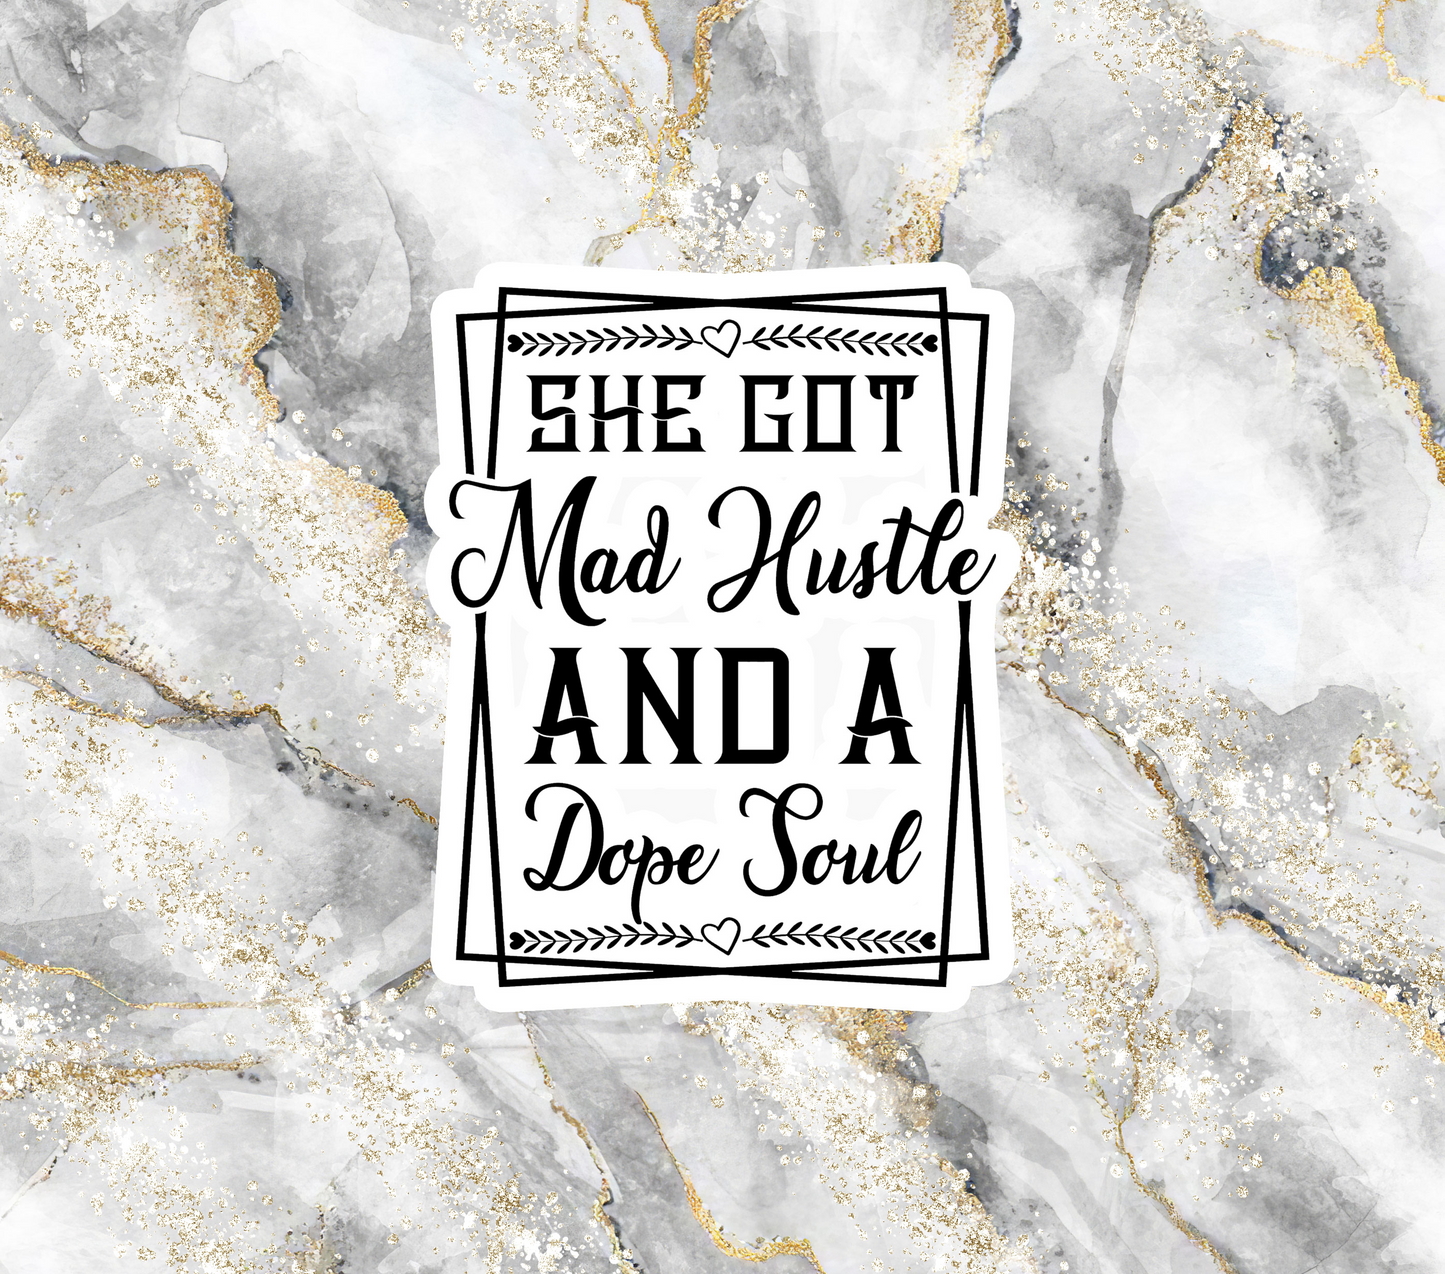 Marble She Got Mad Hustle And A Dope Soul - 20 Oz Sublimation Transfer